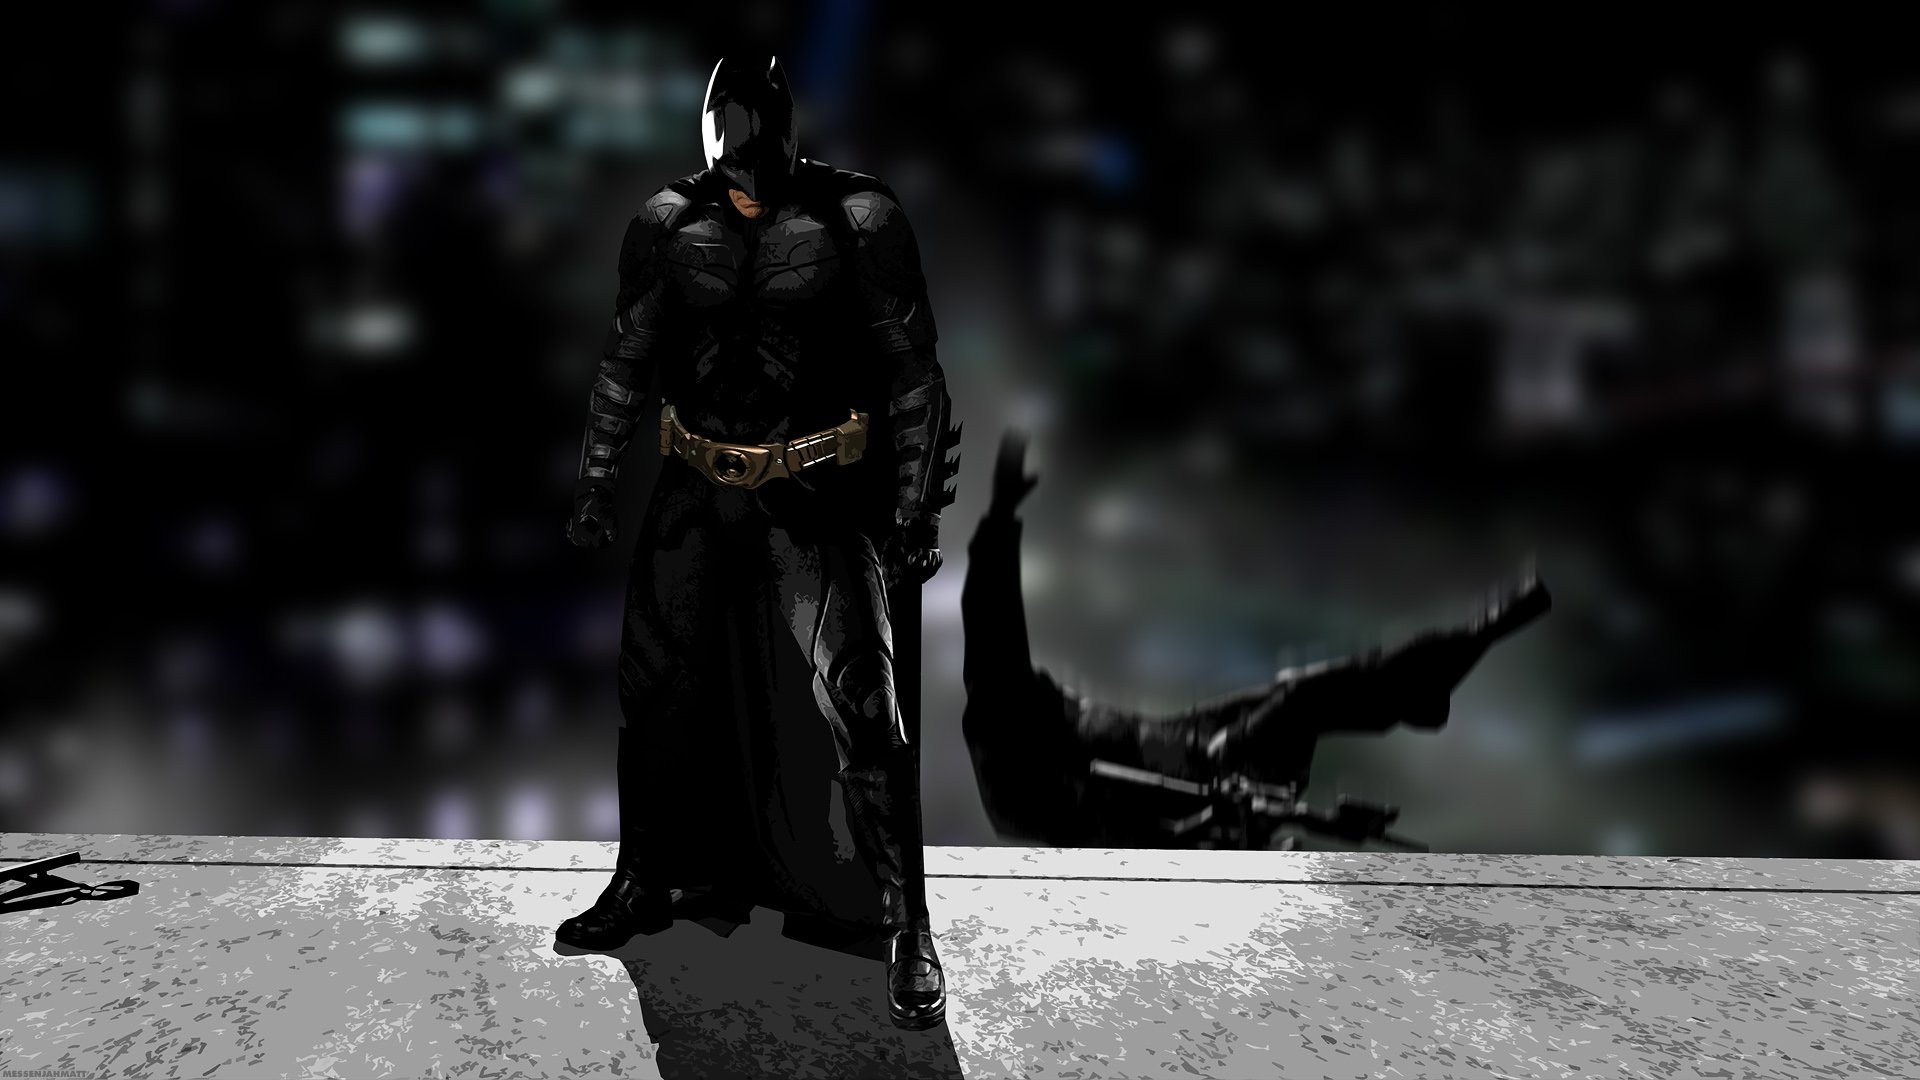 The Dark Knight download the new version for apple